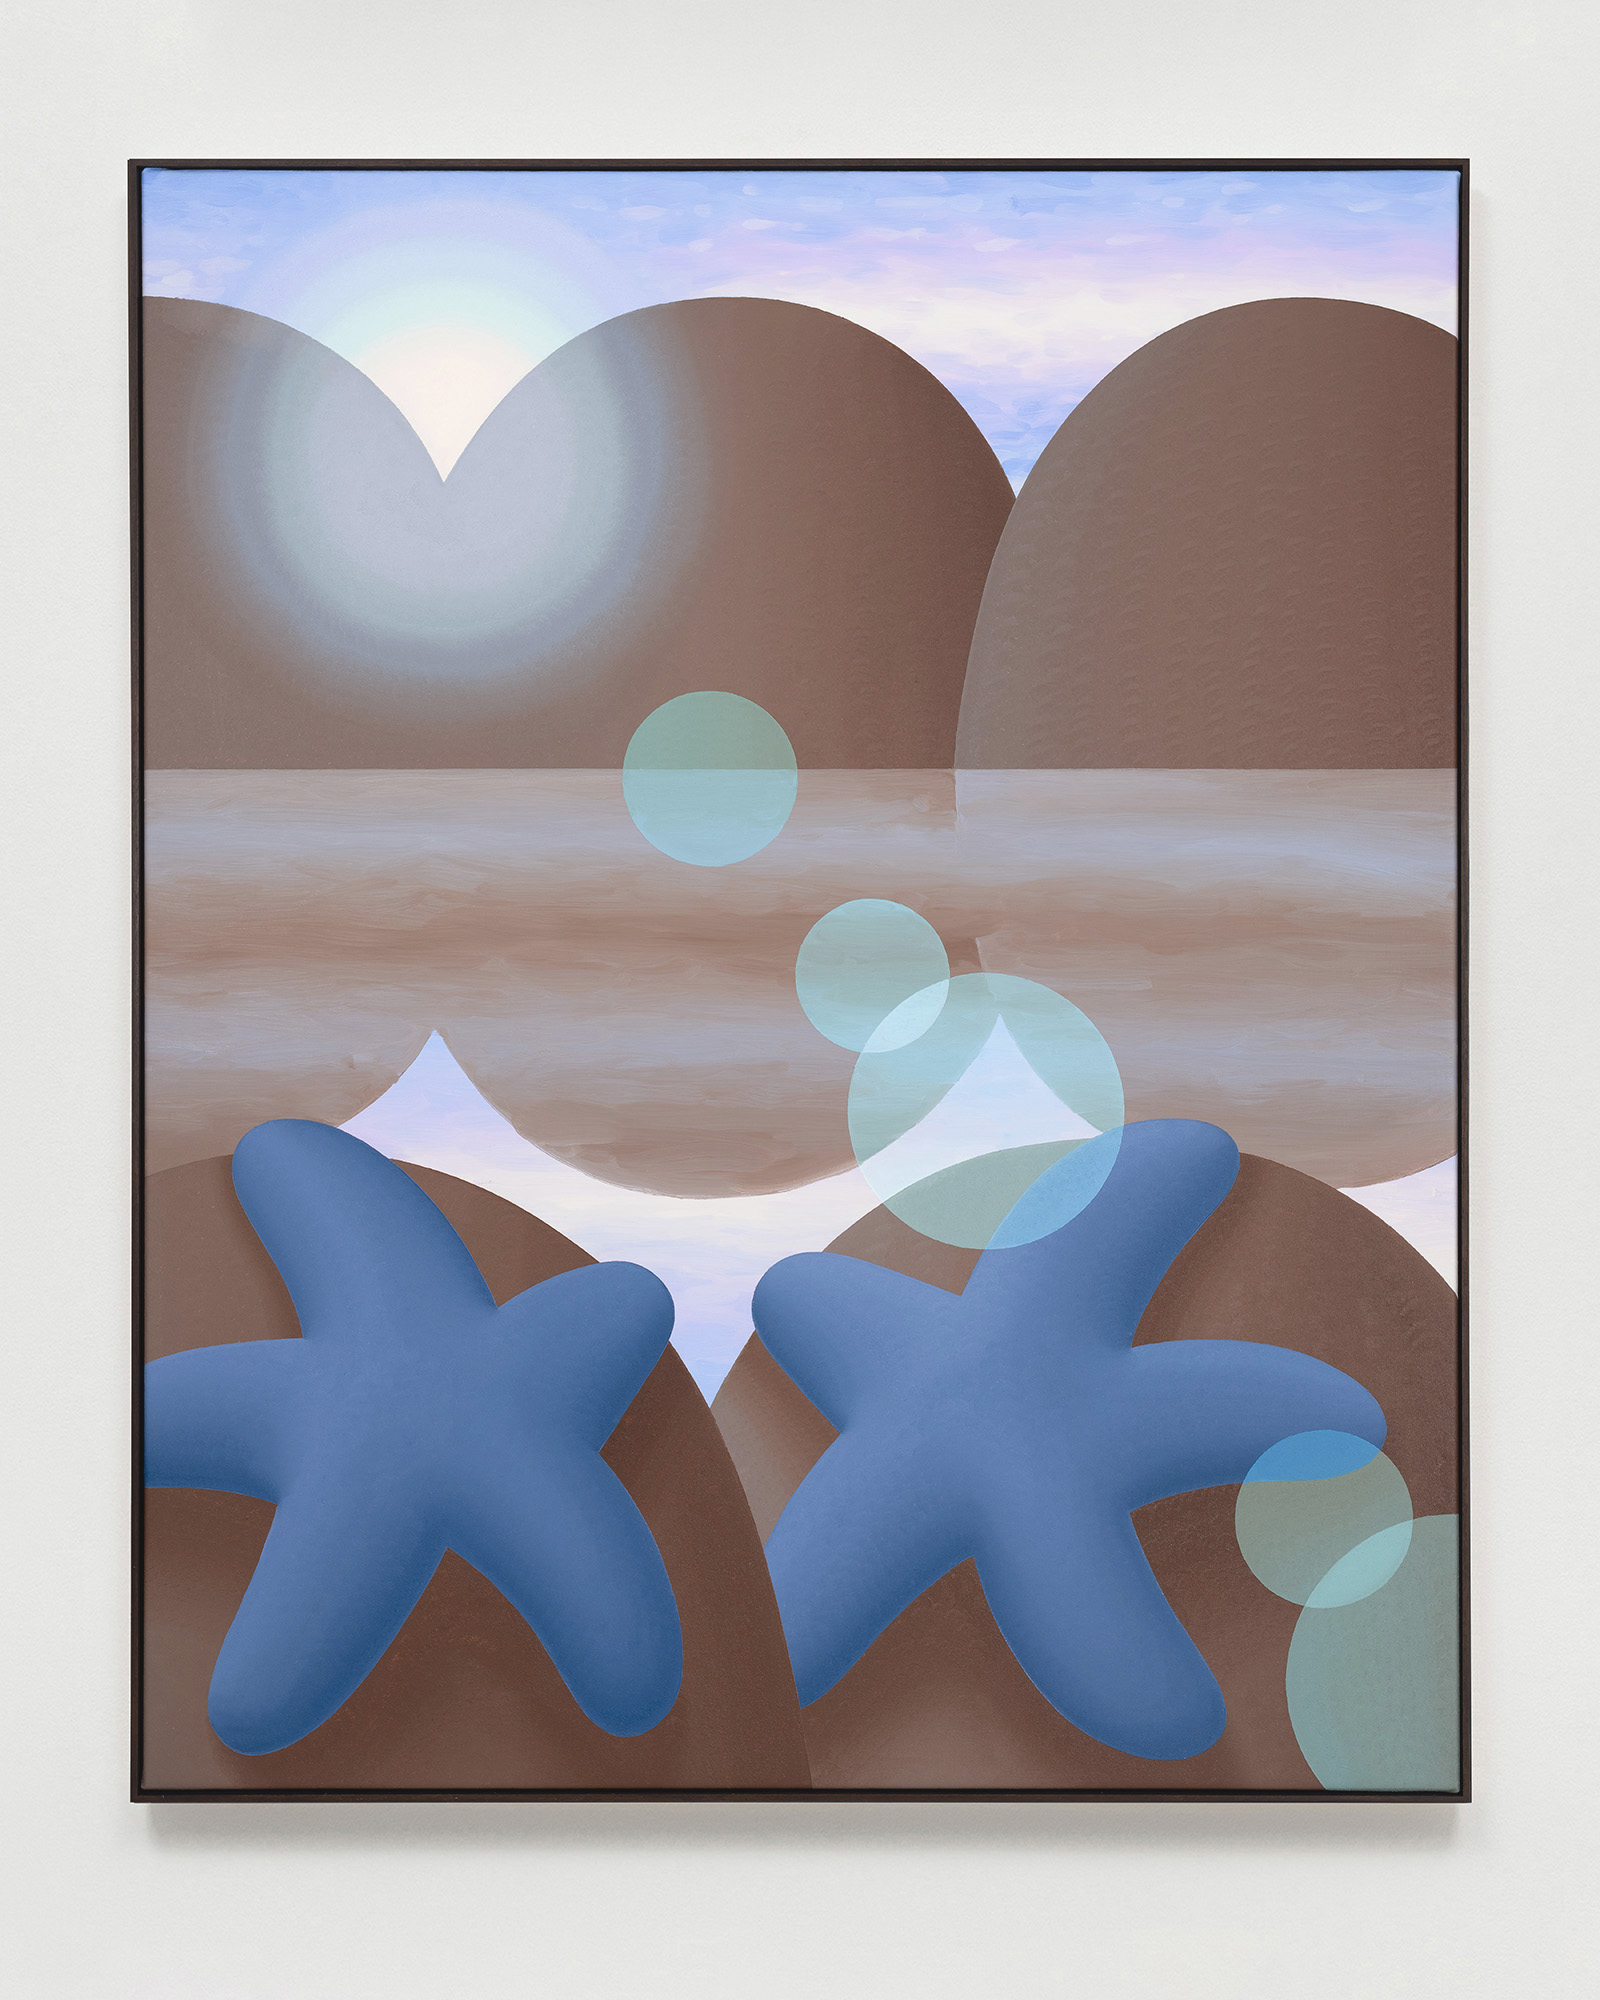 Laurens Legiers, Untitled (Blue Sea Stars with a Moon Glare), 2023, Oil on canvas, 160 x 130 cm, 63 x 51 1/8 in.